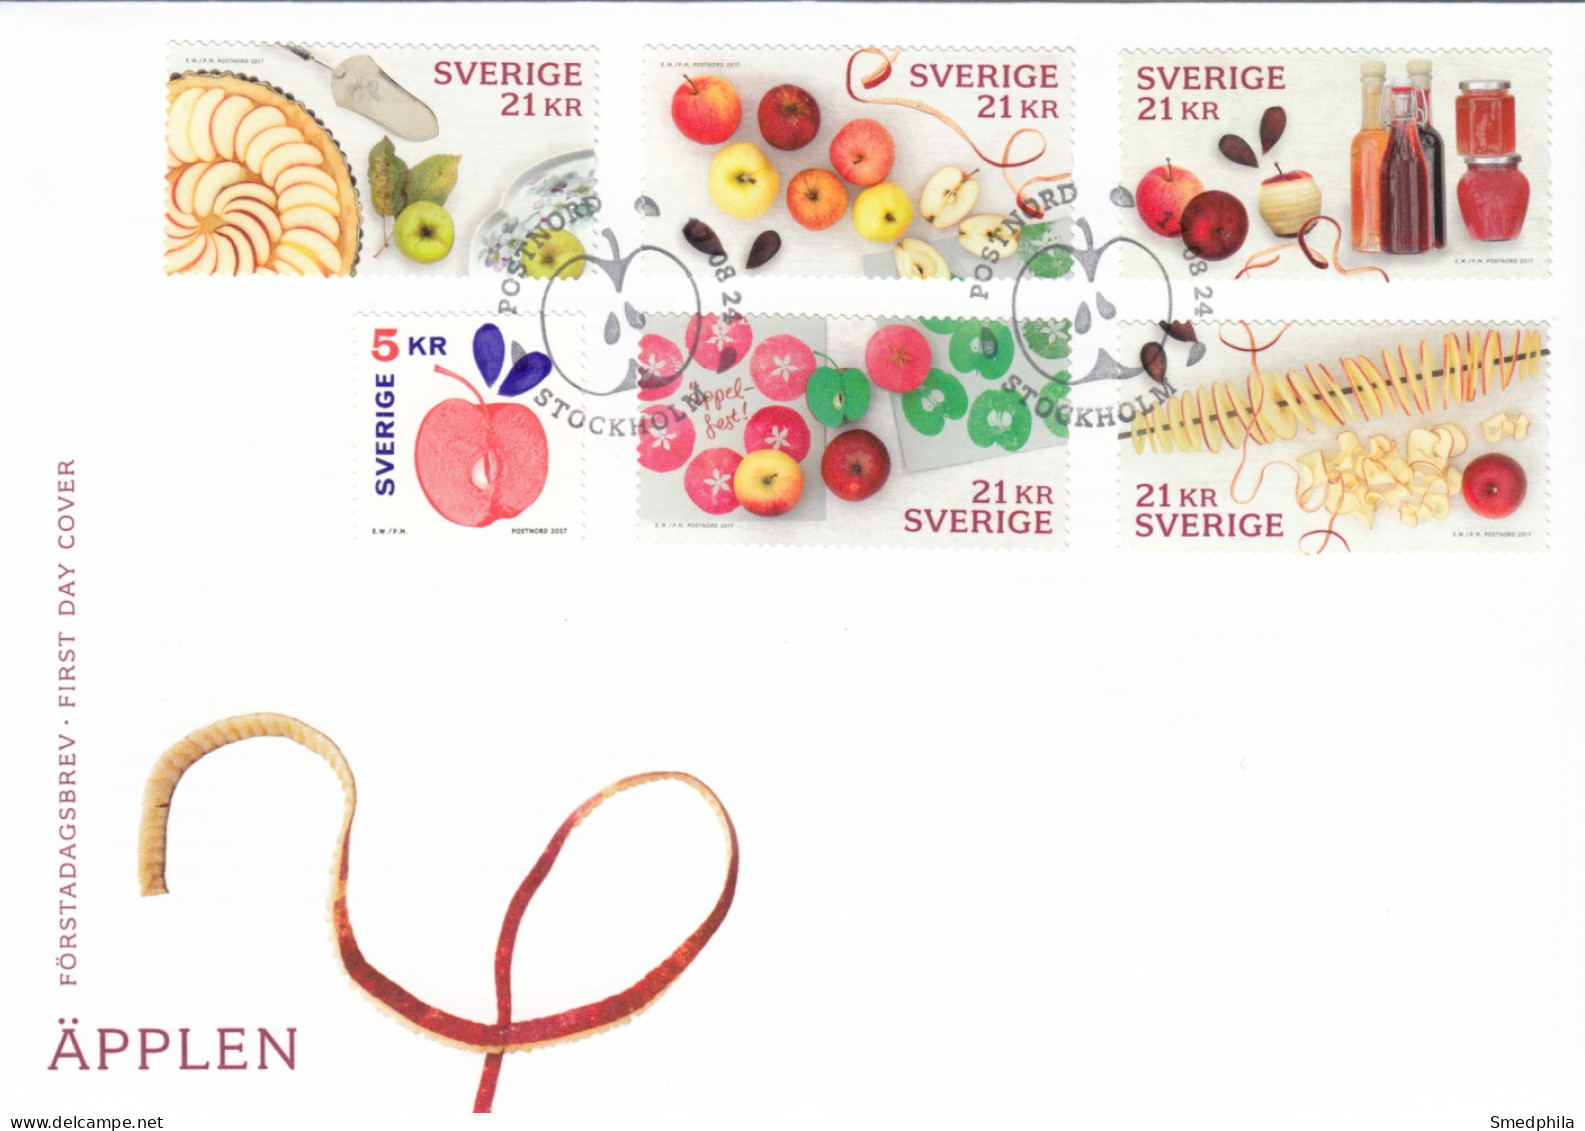 Sweden FDC 2017 - Apples - FDC